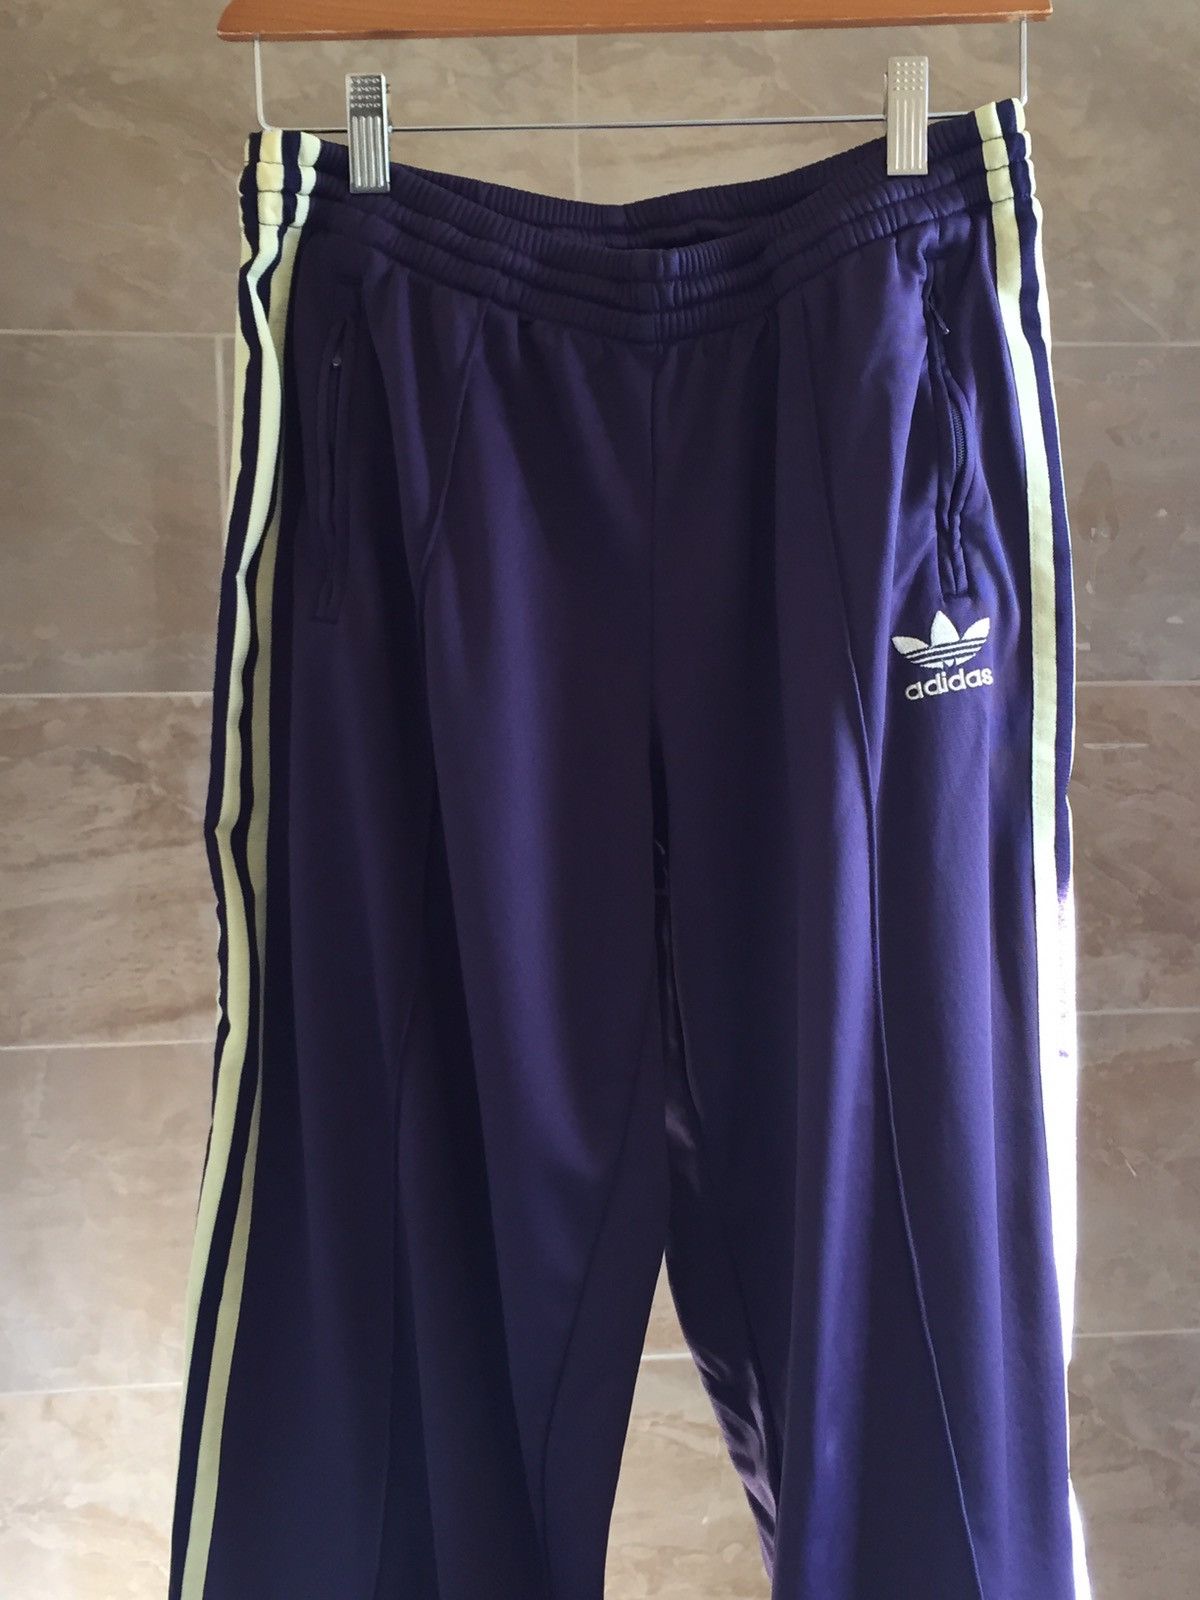 Adidas Pleated Track Pants Size US 32 / EU 48 - 1 Preview